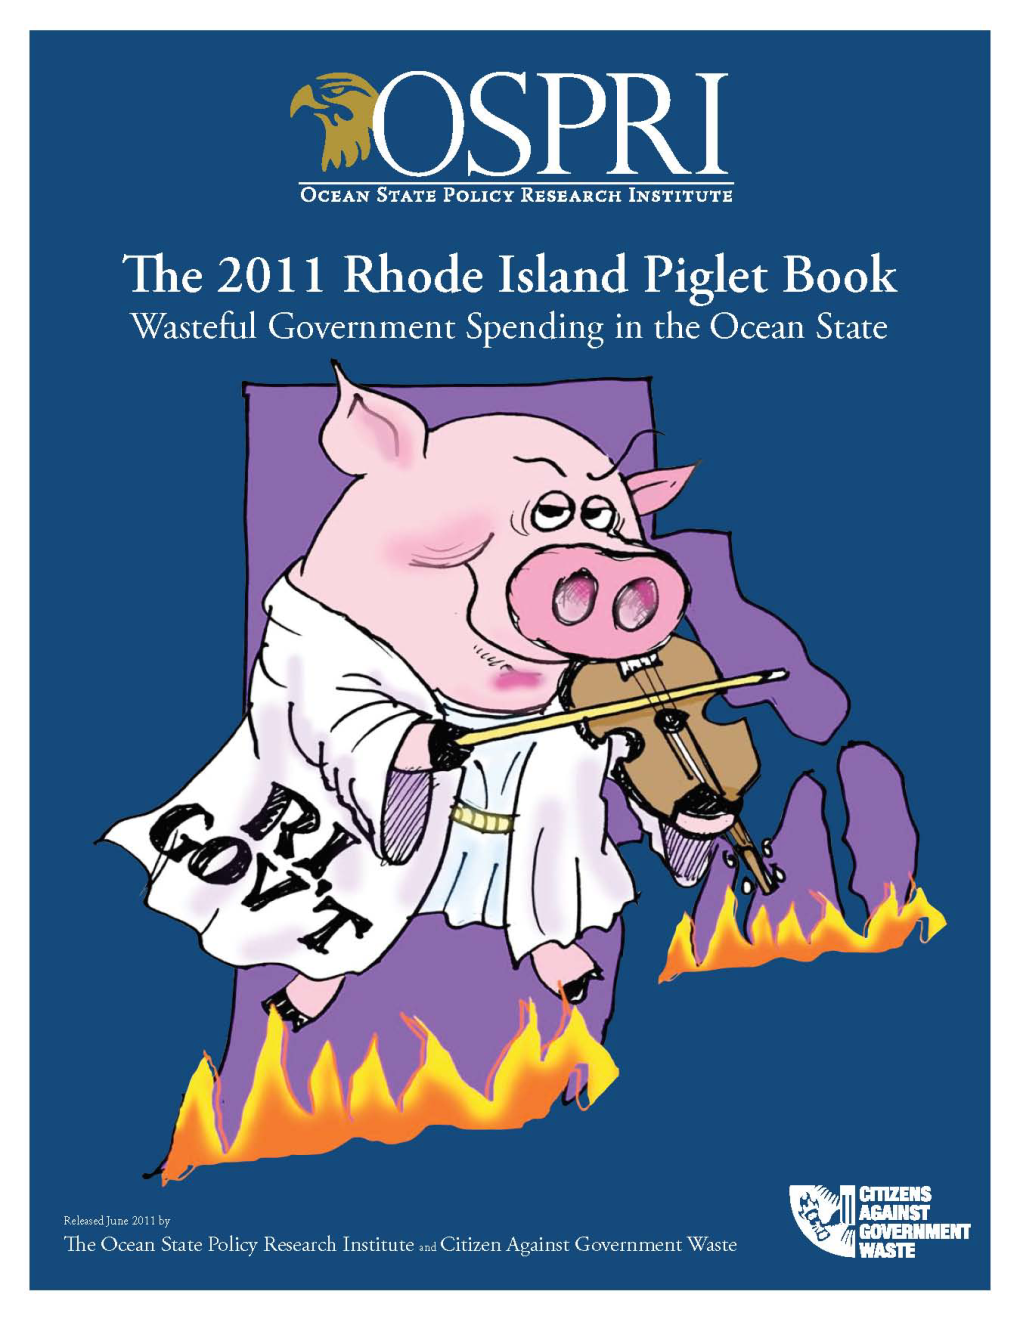 2011 Rhode Island Piglet Book by OSPRI and CAGW